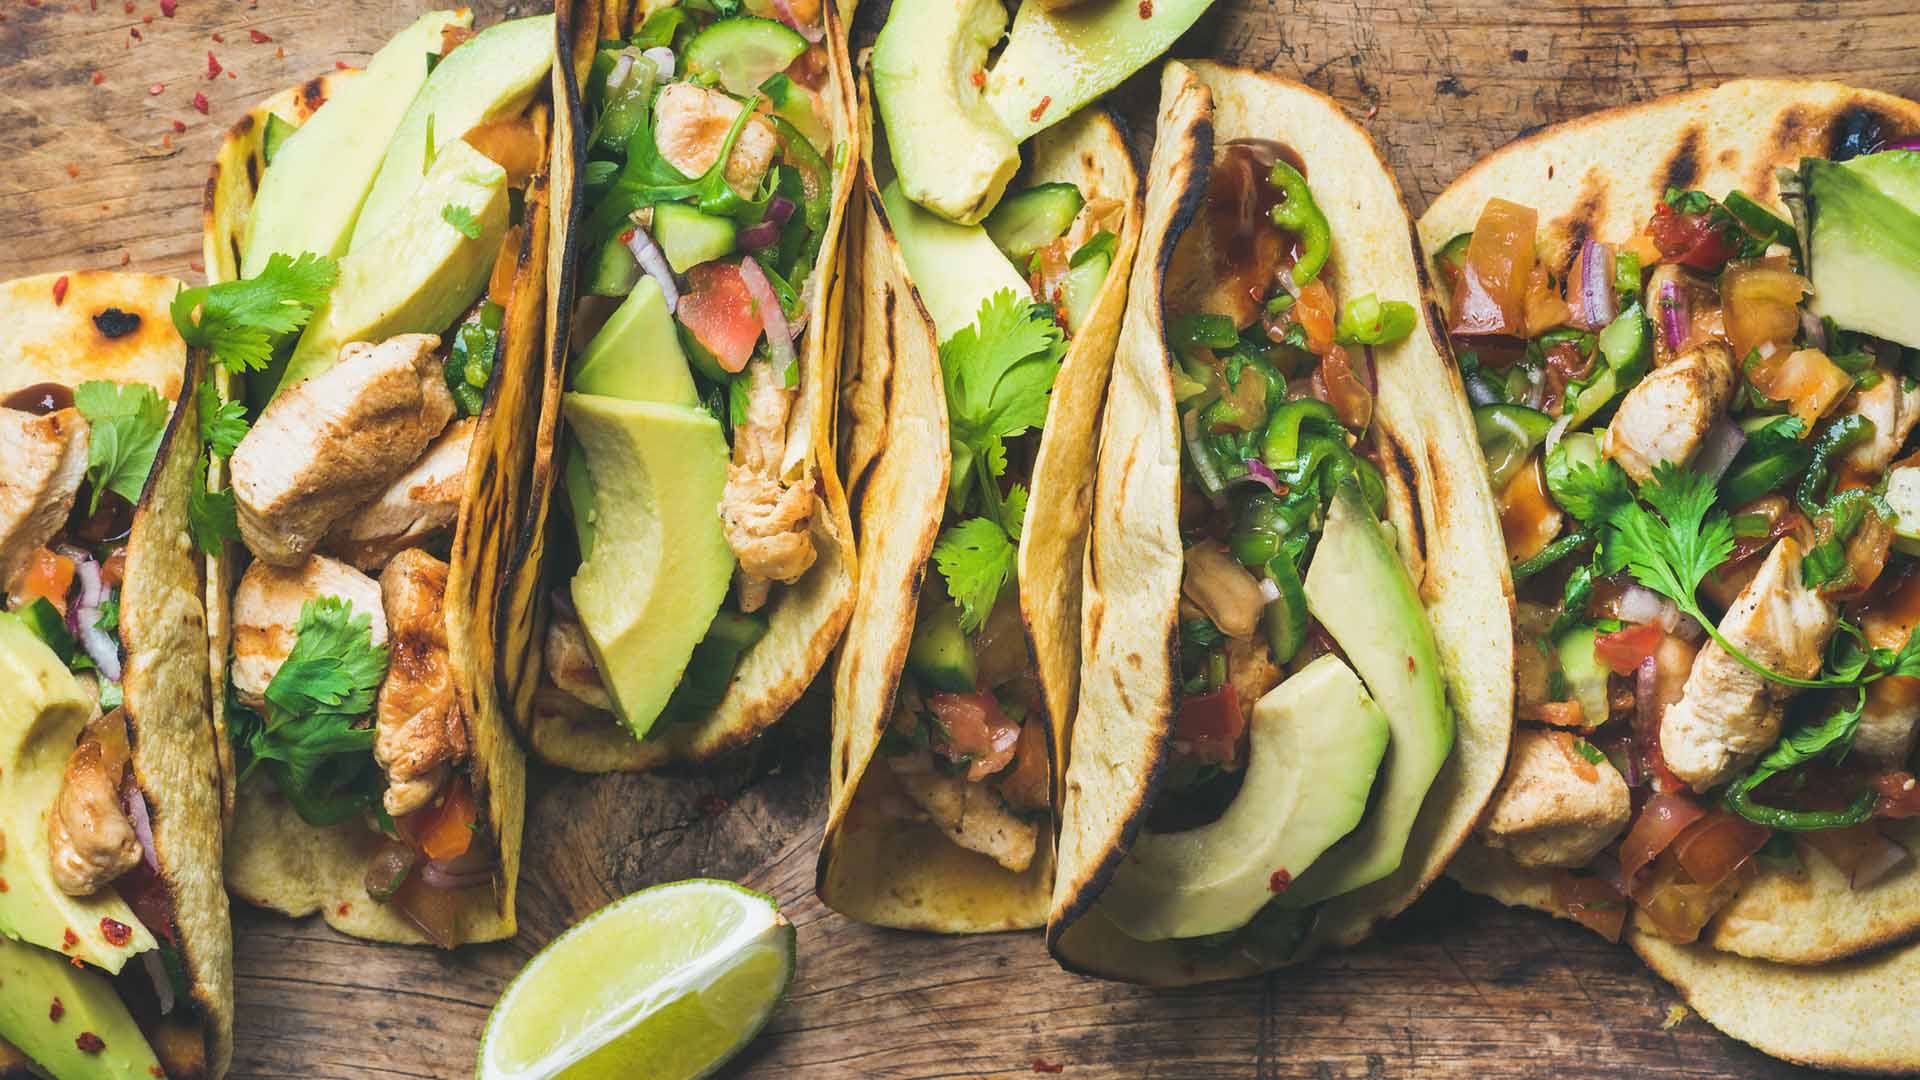 Tacos with grilled chicken, avocado, fresh salsa sauce and limes over rustic wooden background, top view. Healthy low carb and low fat lunch or food for company. Dieting and weight loss concept